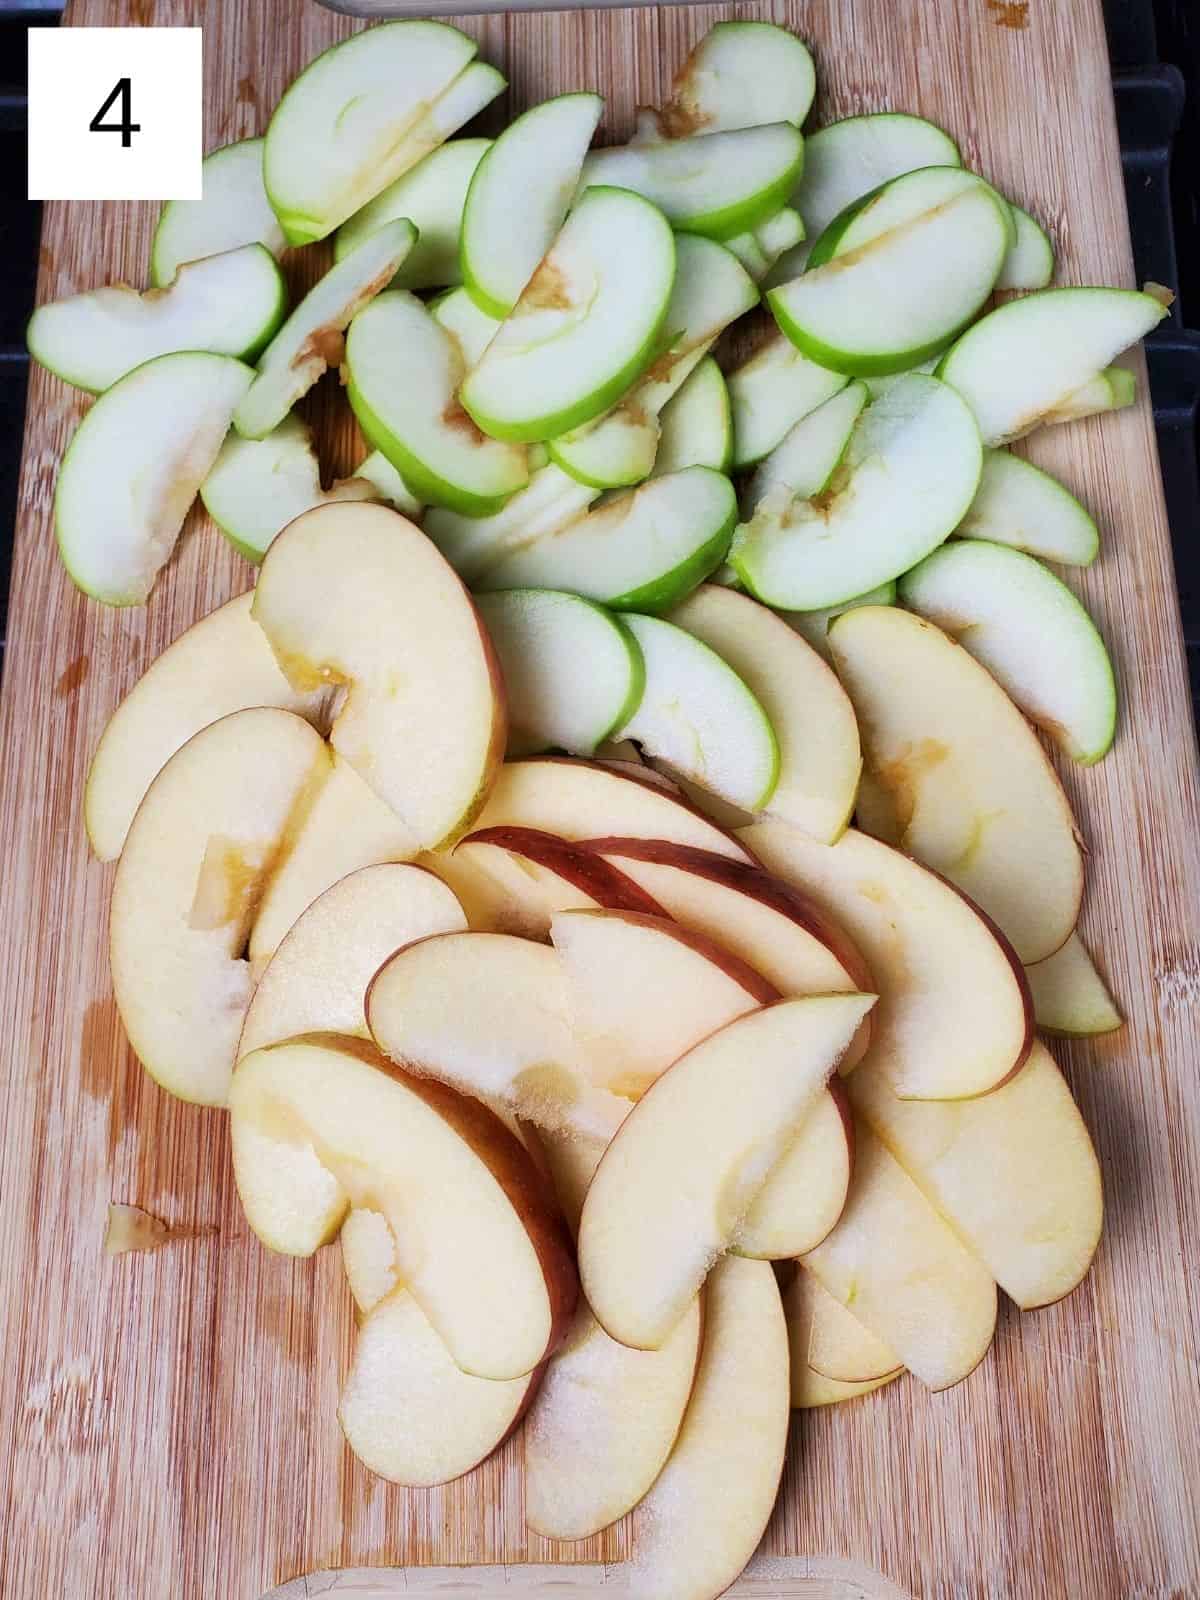 evenly cut slices of apples on a wooden cutting board.